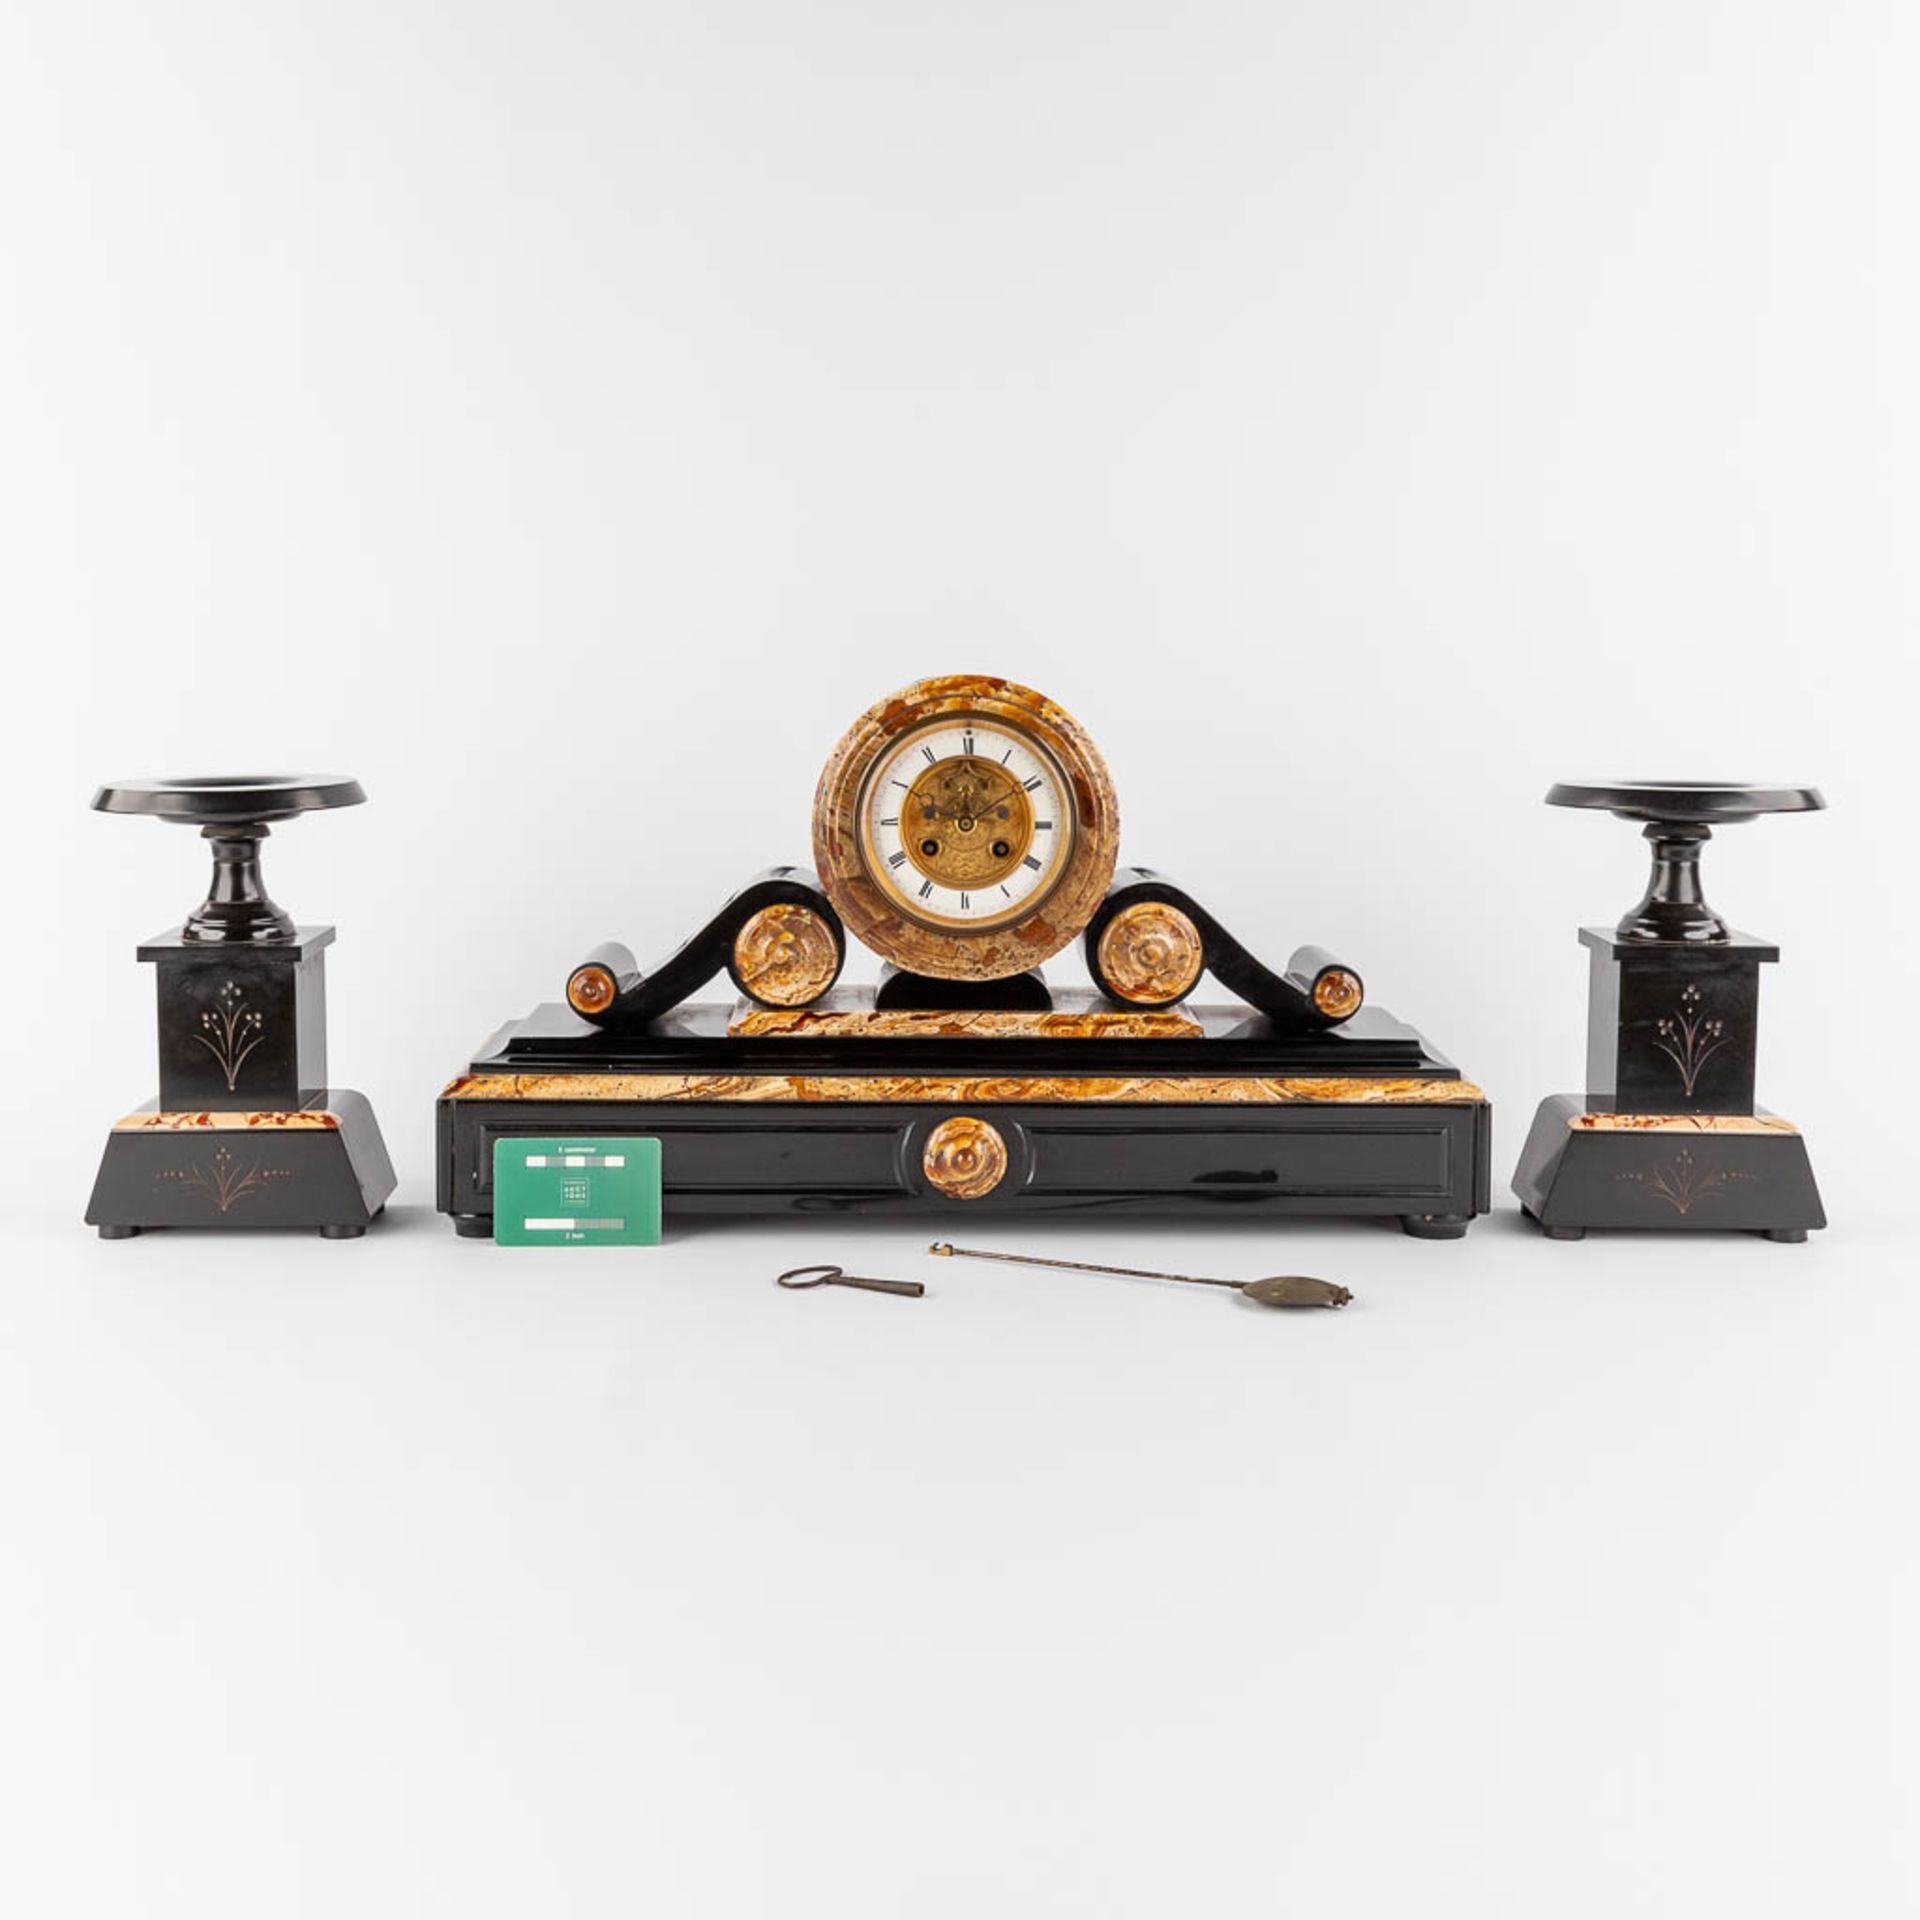 A three-piece mantle garniture clock and side pieces, marble. Circa 1900. (D:15 x W:54 x H:30 cm) - Image 2 of 12